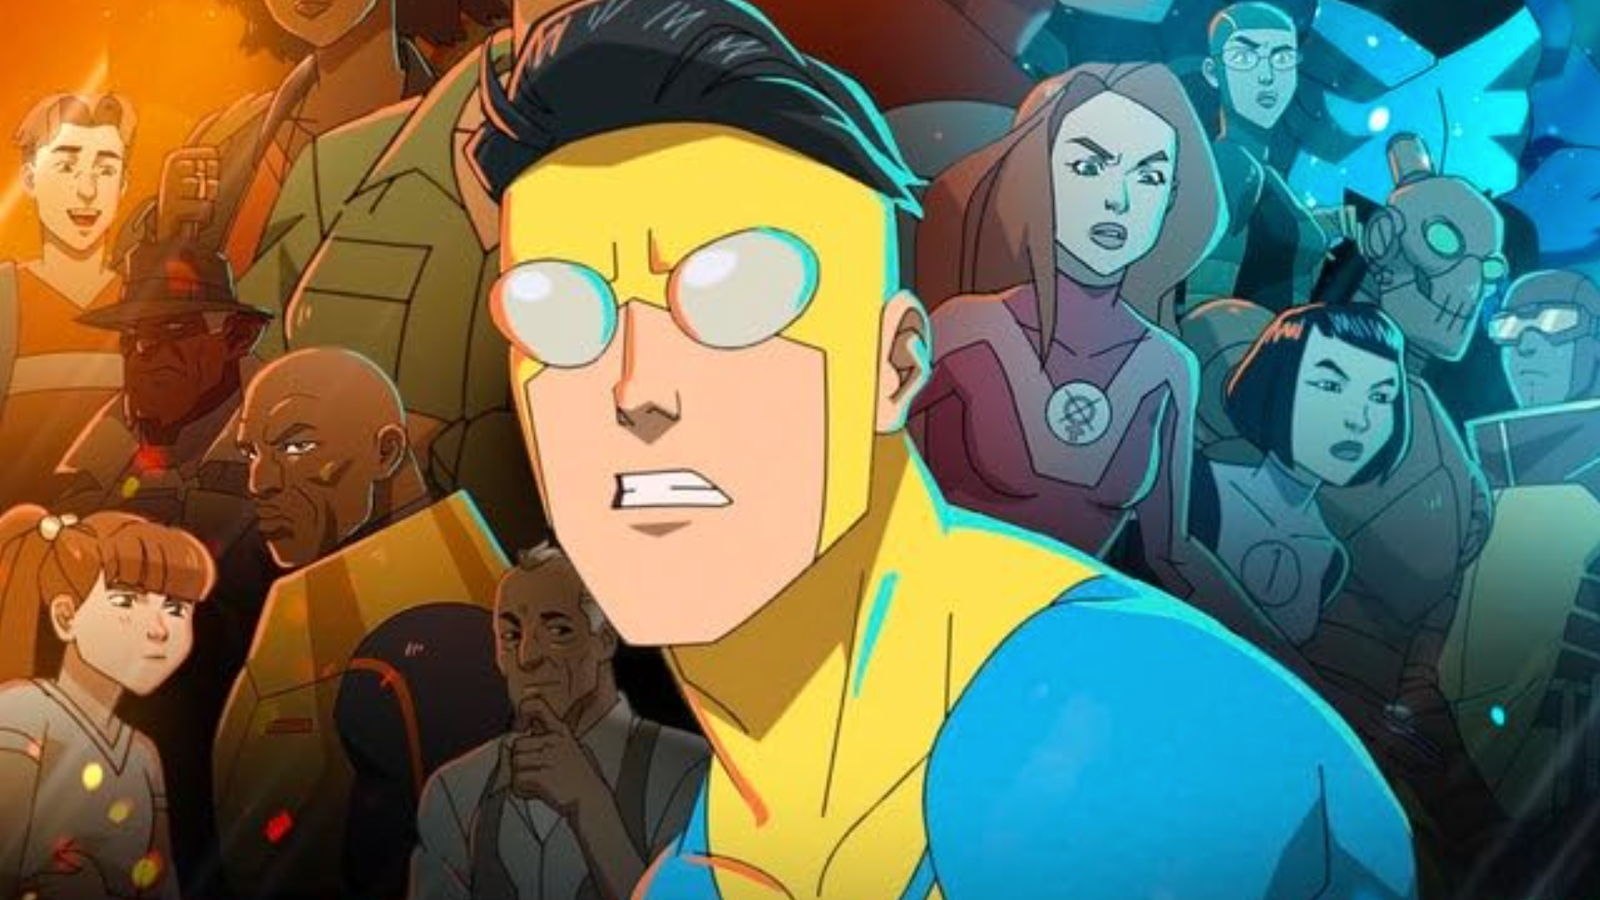 Invincible Episode 6 is OUT NOW! - Skybound Entertainment